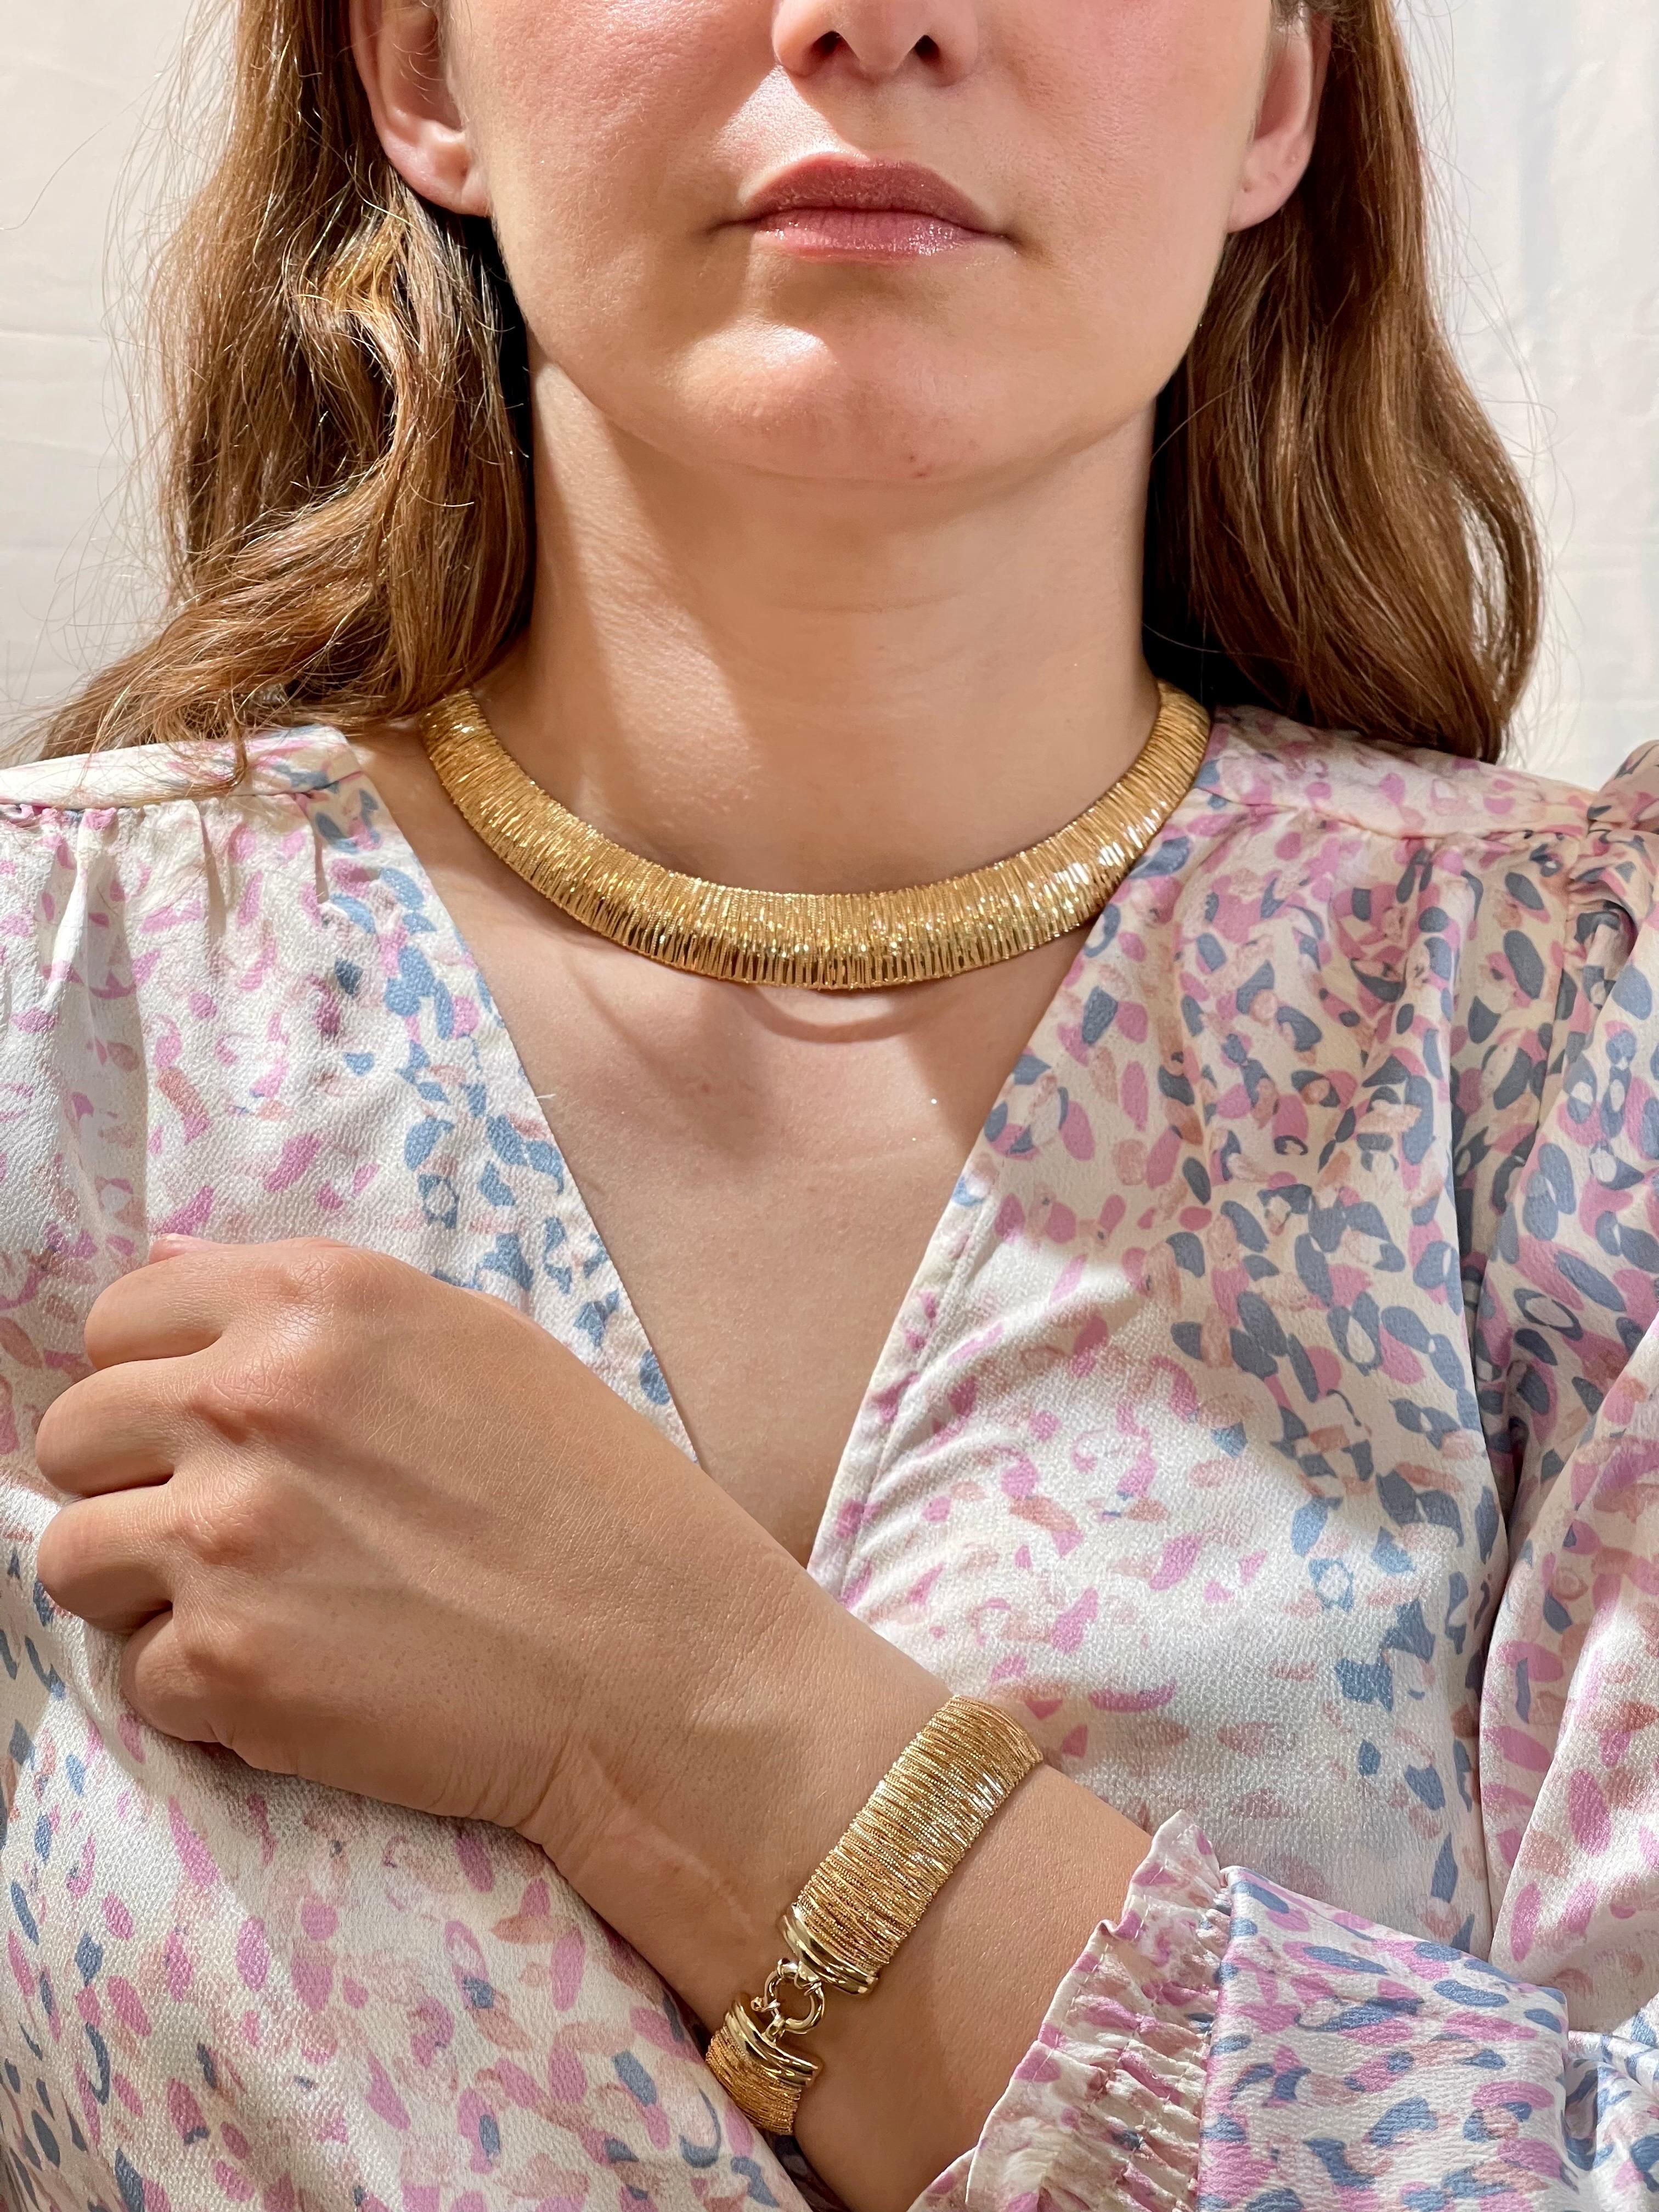 Solid 18Kt Yellow Gold Cleopatra Collar Bib Necklace Choker & Bracelet 68gm  In Excellent Condition For Sale In New York, NY